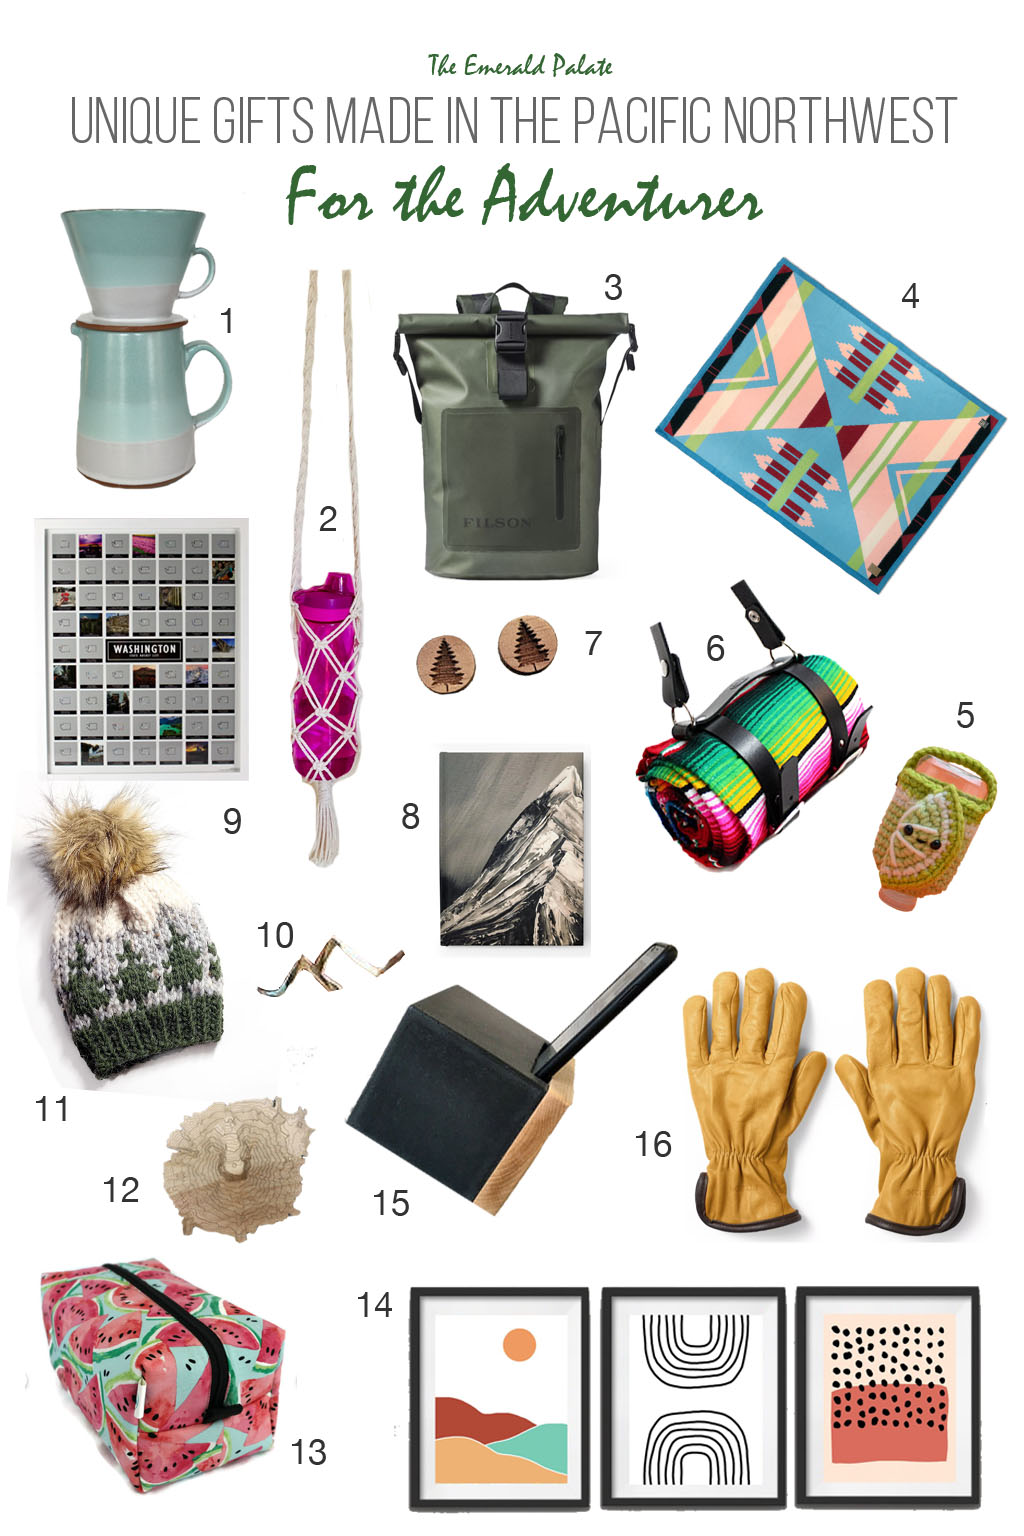 Pacific Northwest Gifts Guide Adventurer